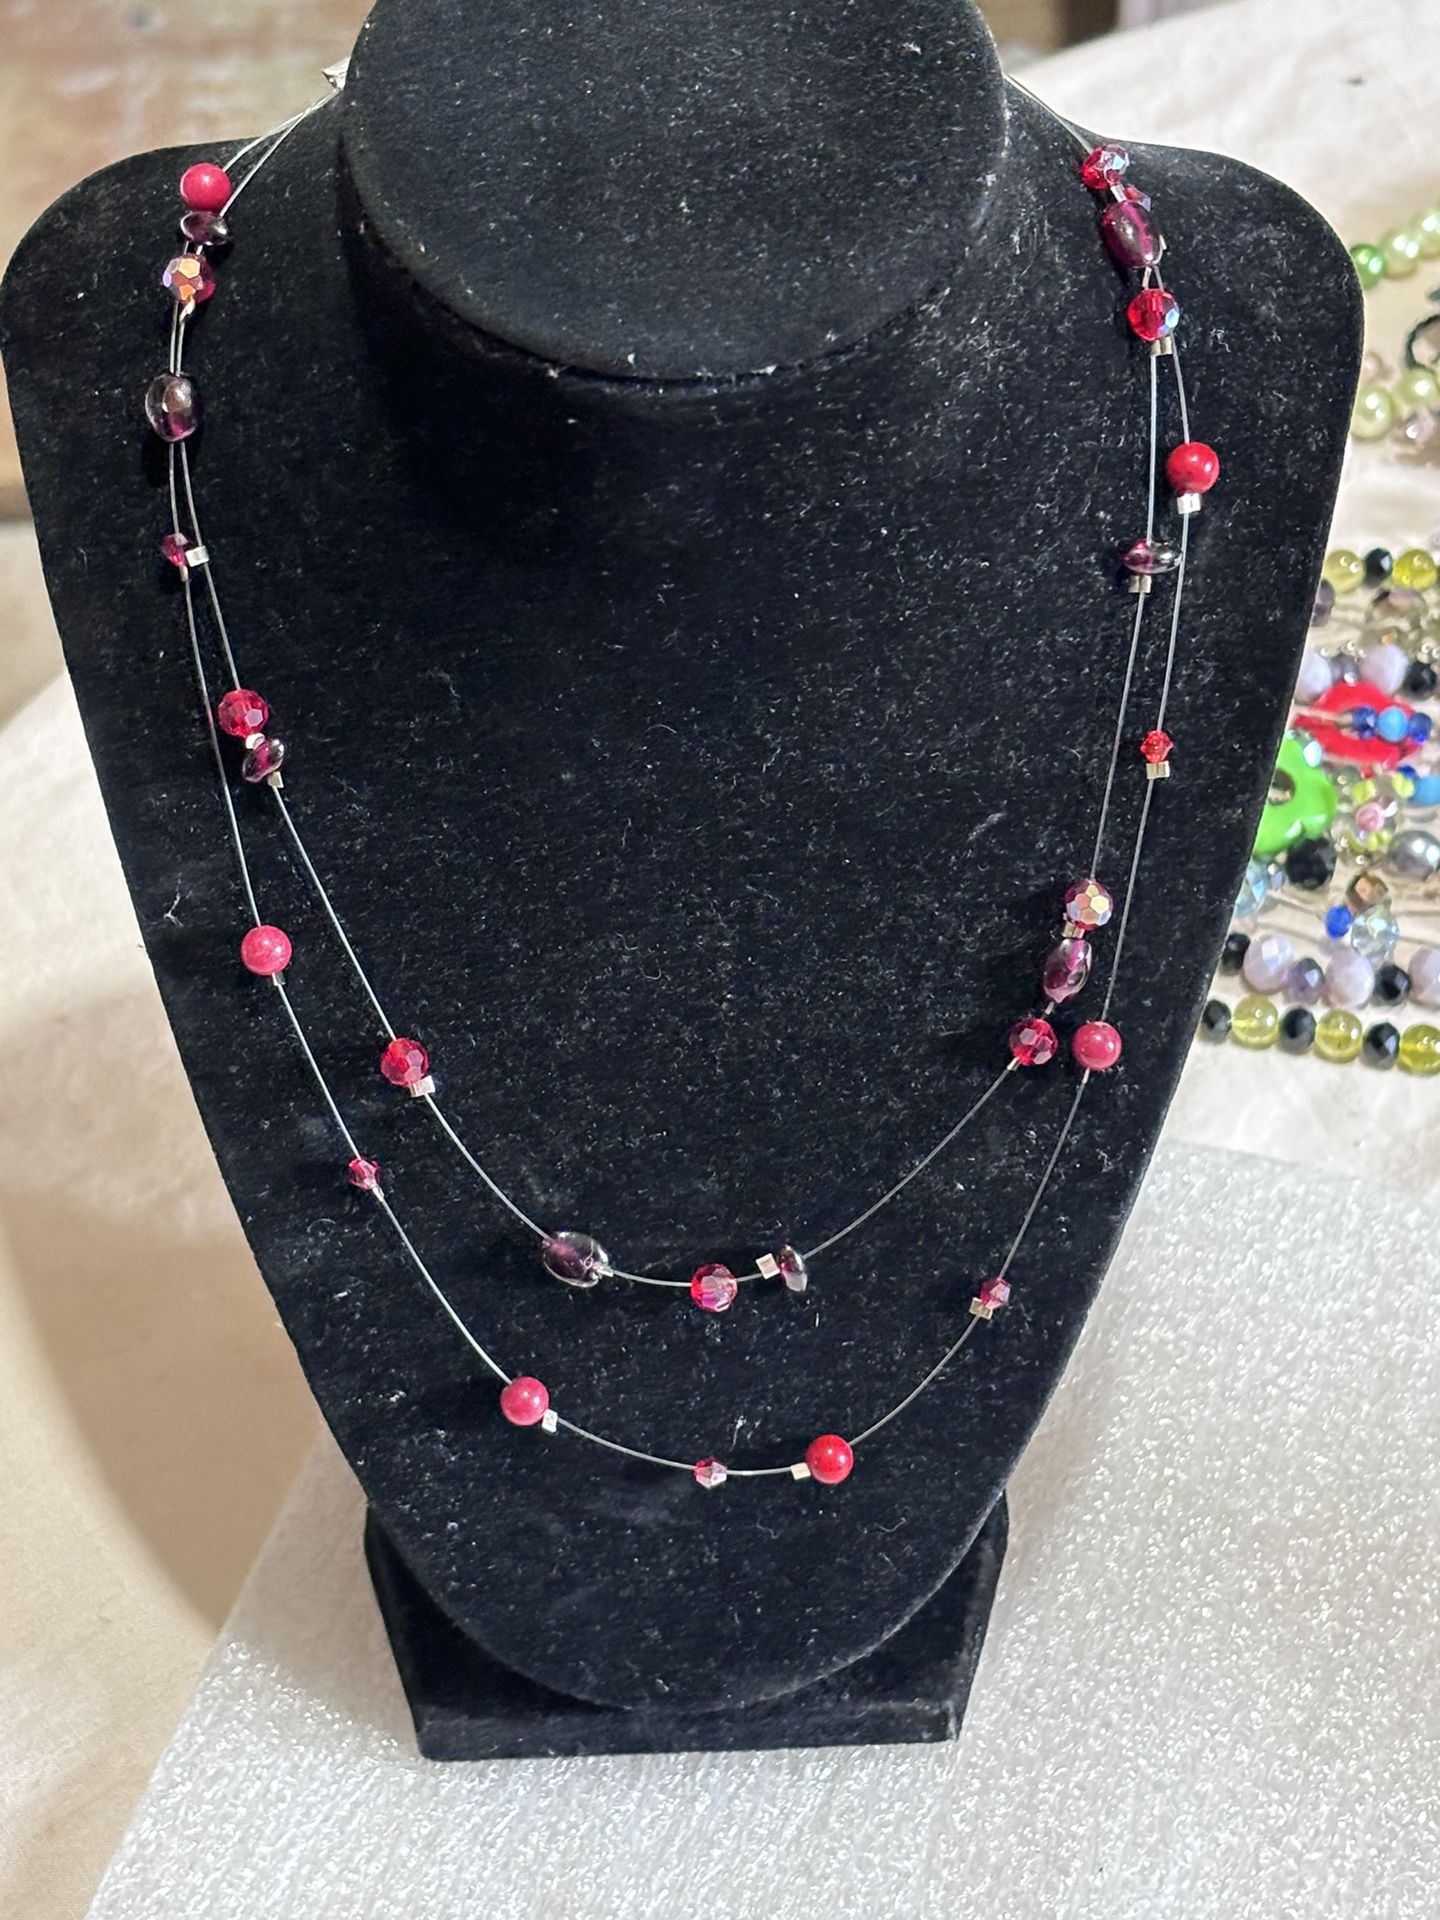 Multistrand Floating Necklace Made By TKays 